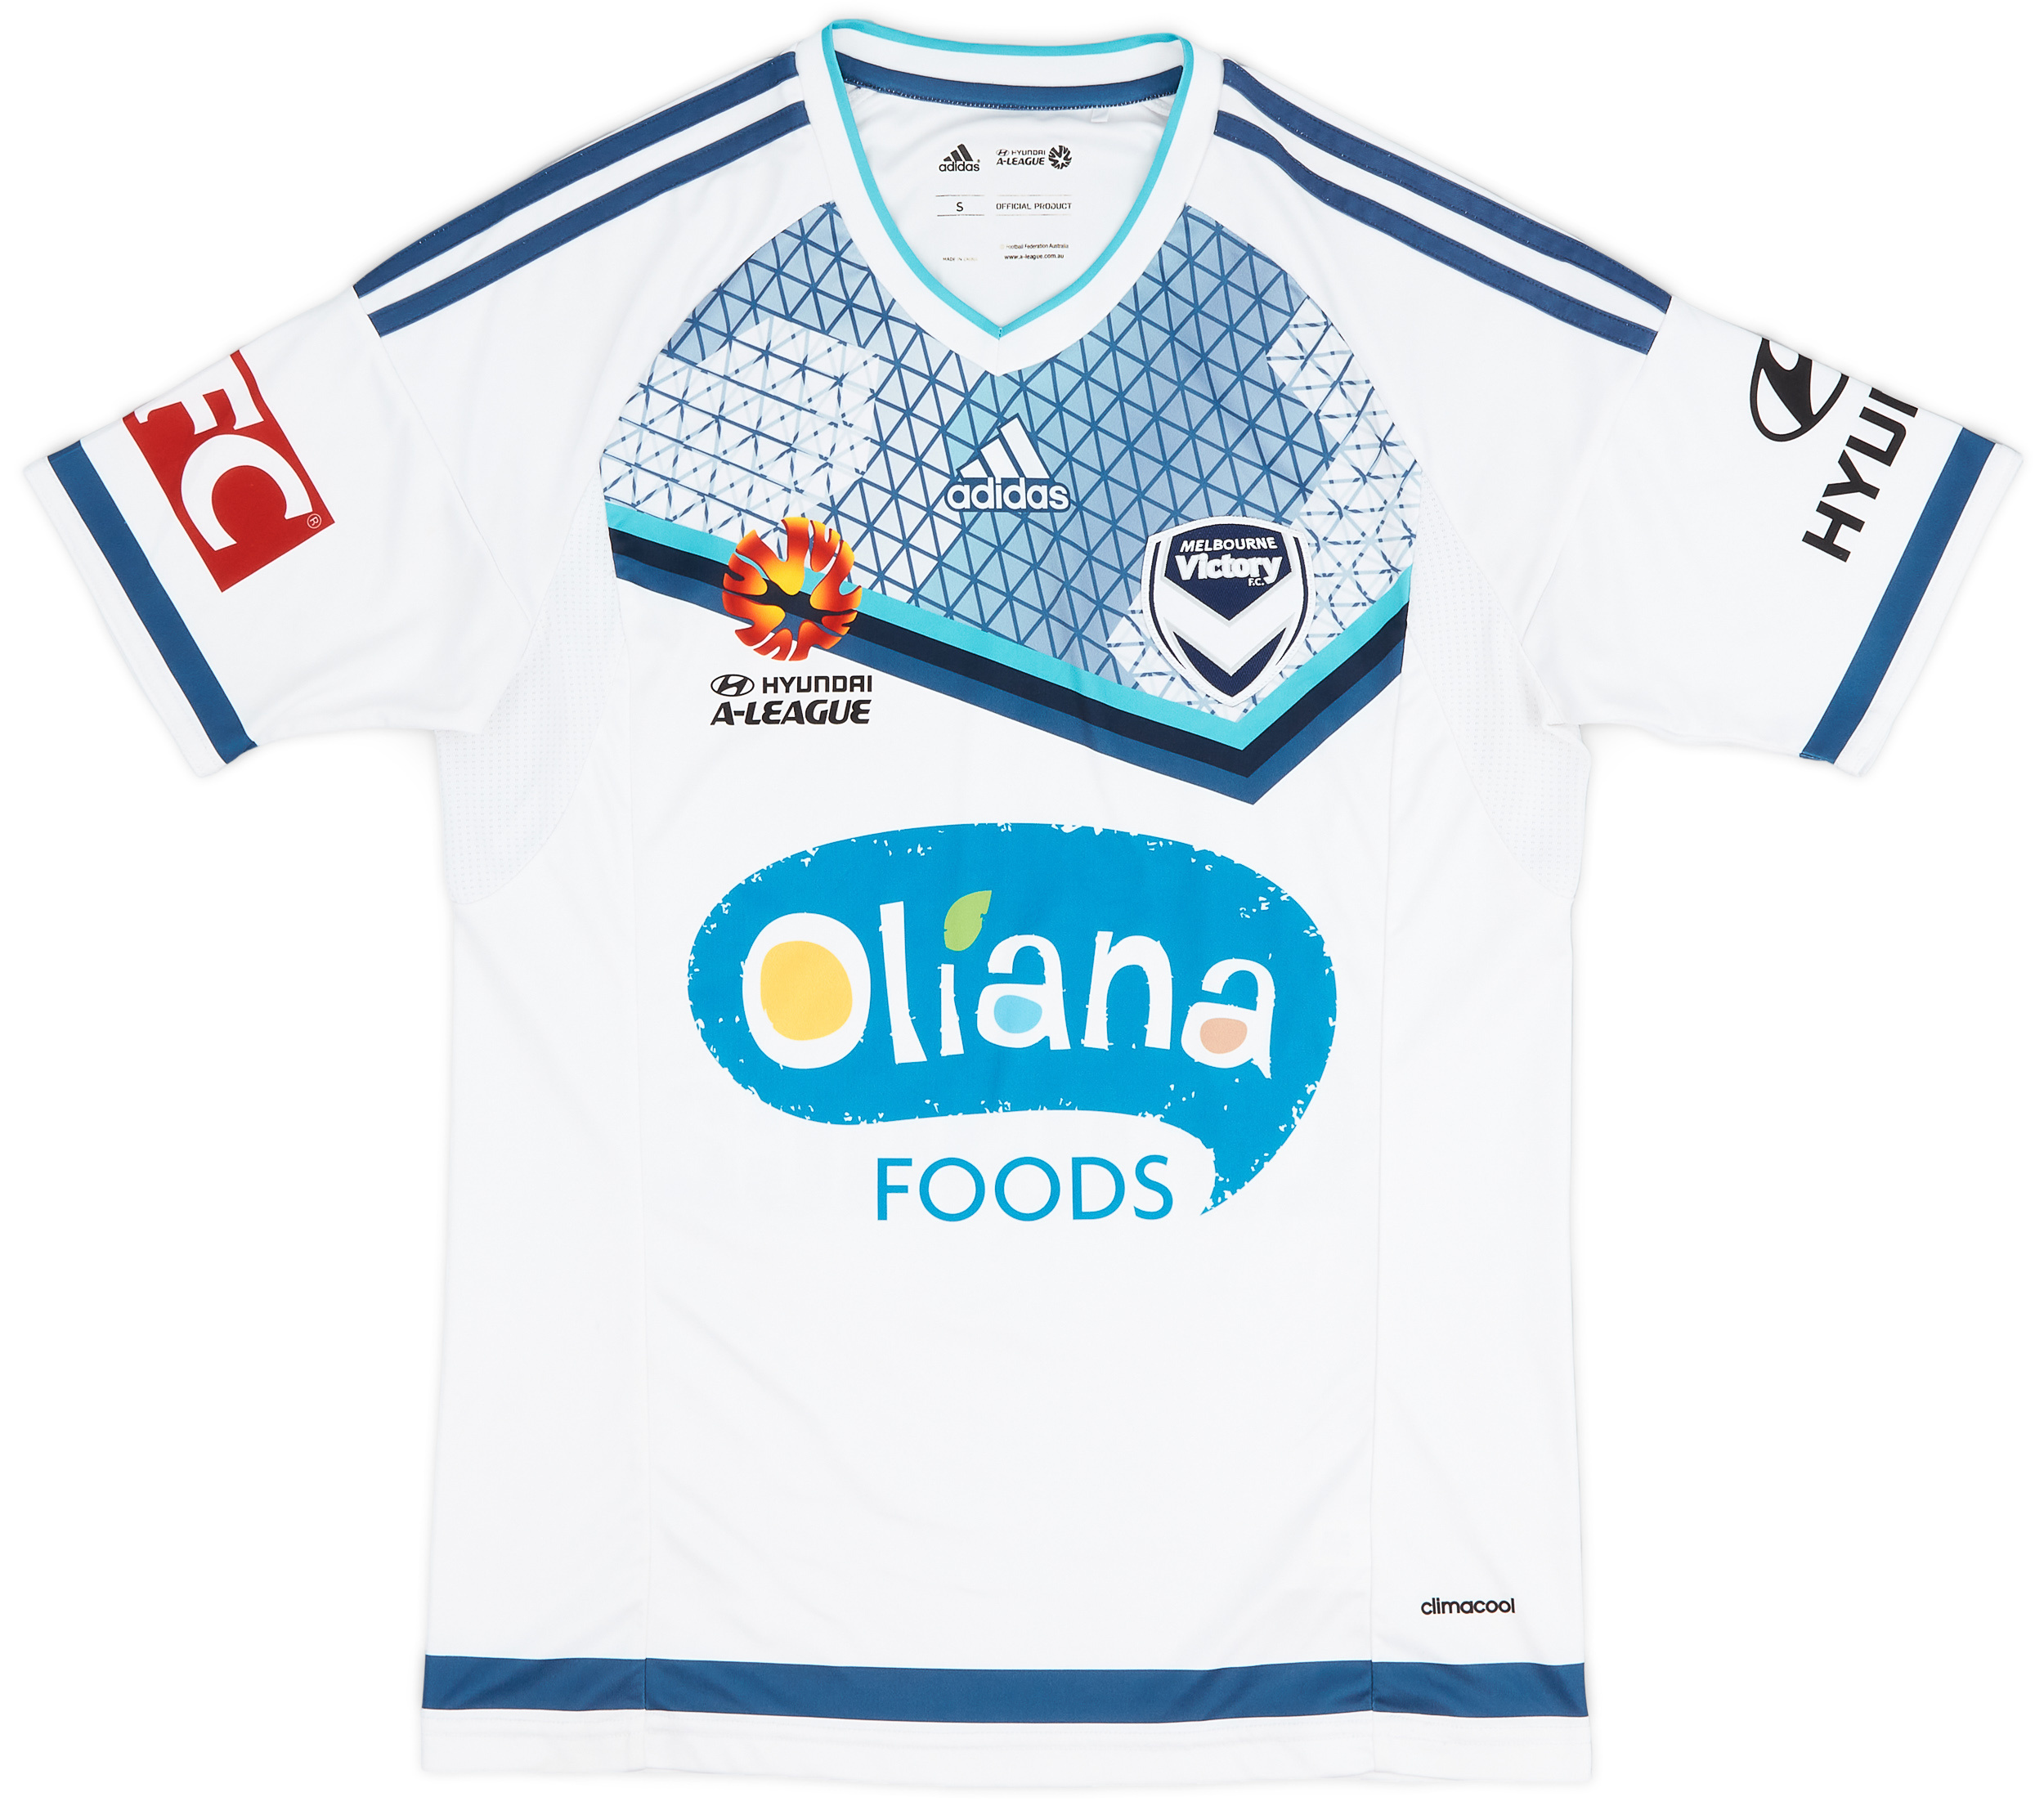 2015-16 Melbourne Victory Away Shirt - 8/10 - ()